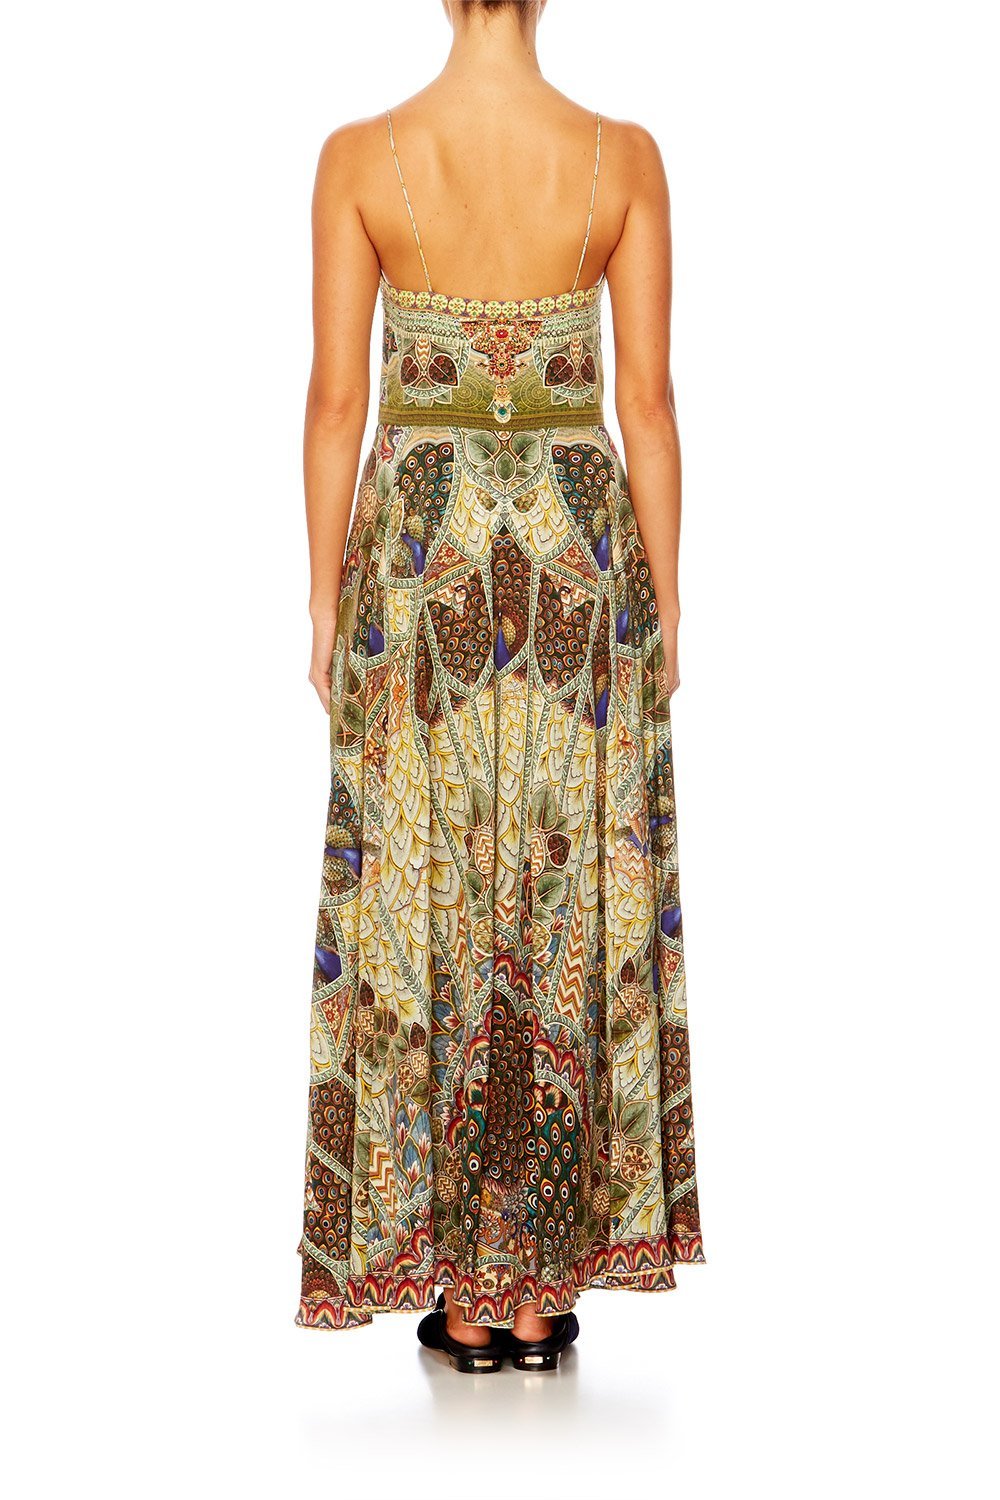 ECHOES OF ENCHANTMENT LONG DRESS W TIE FRONT